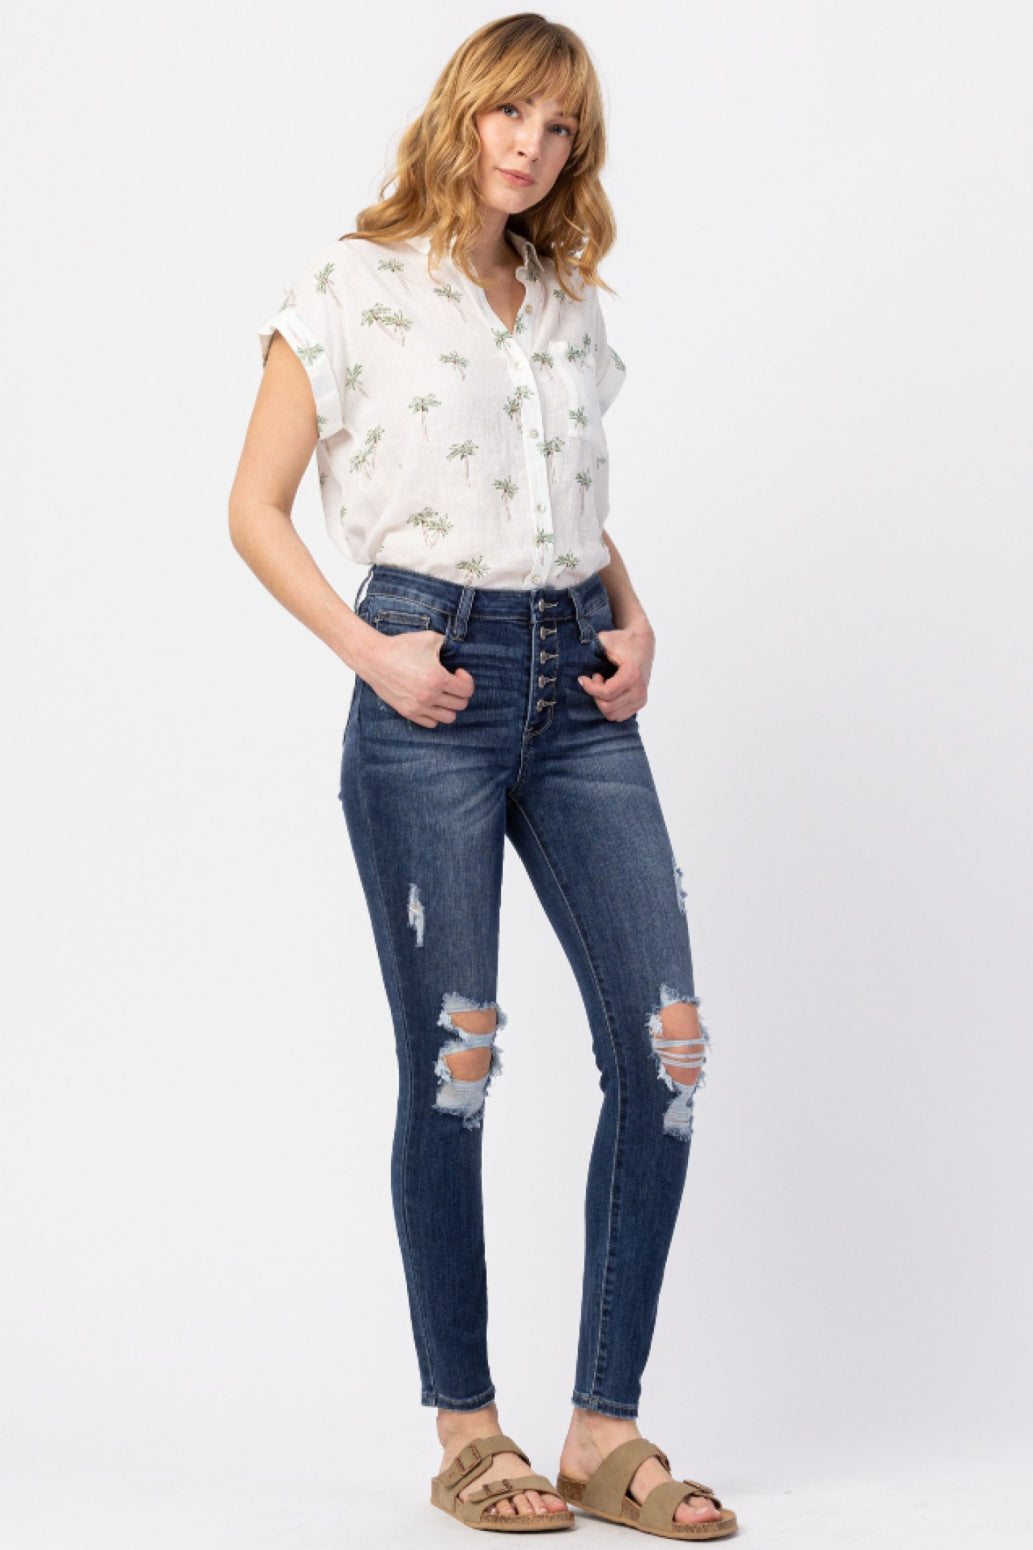 Judy Blue Button Fly Skinny High Waist Jeans Style 88477